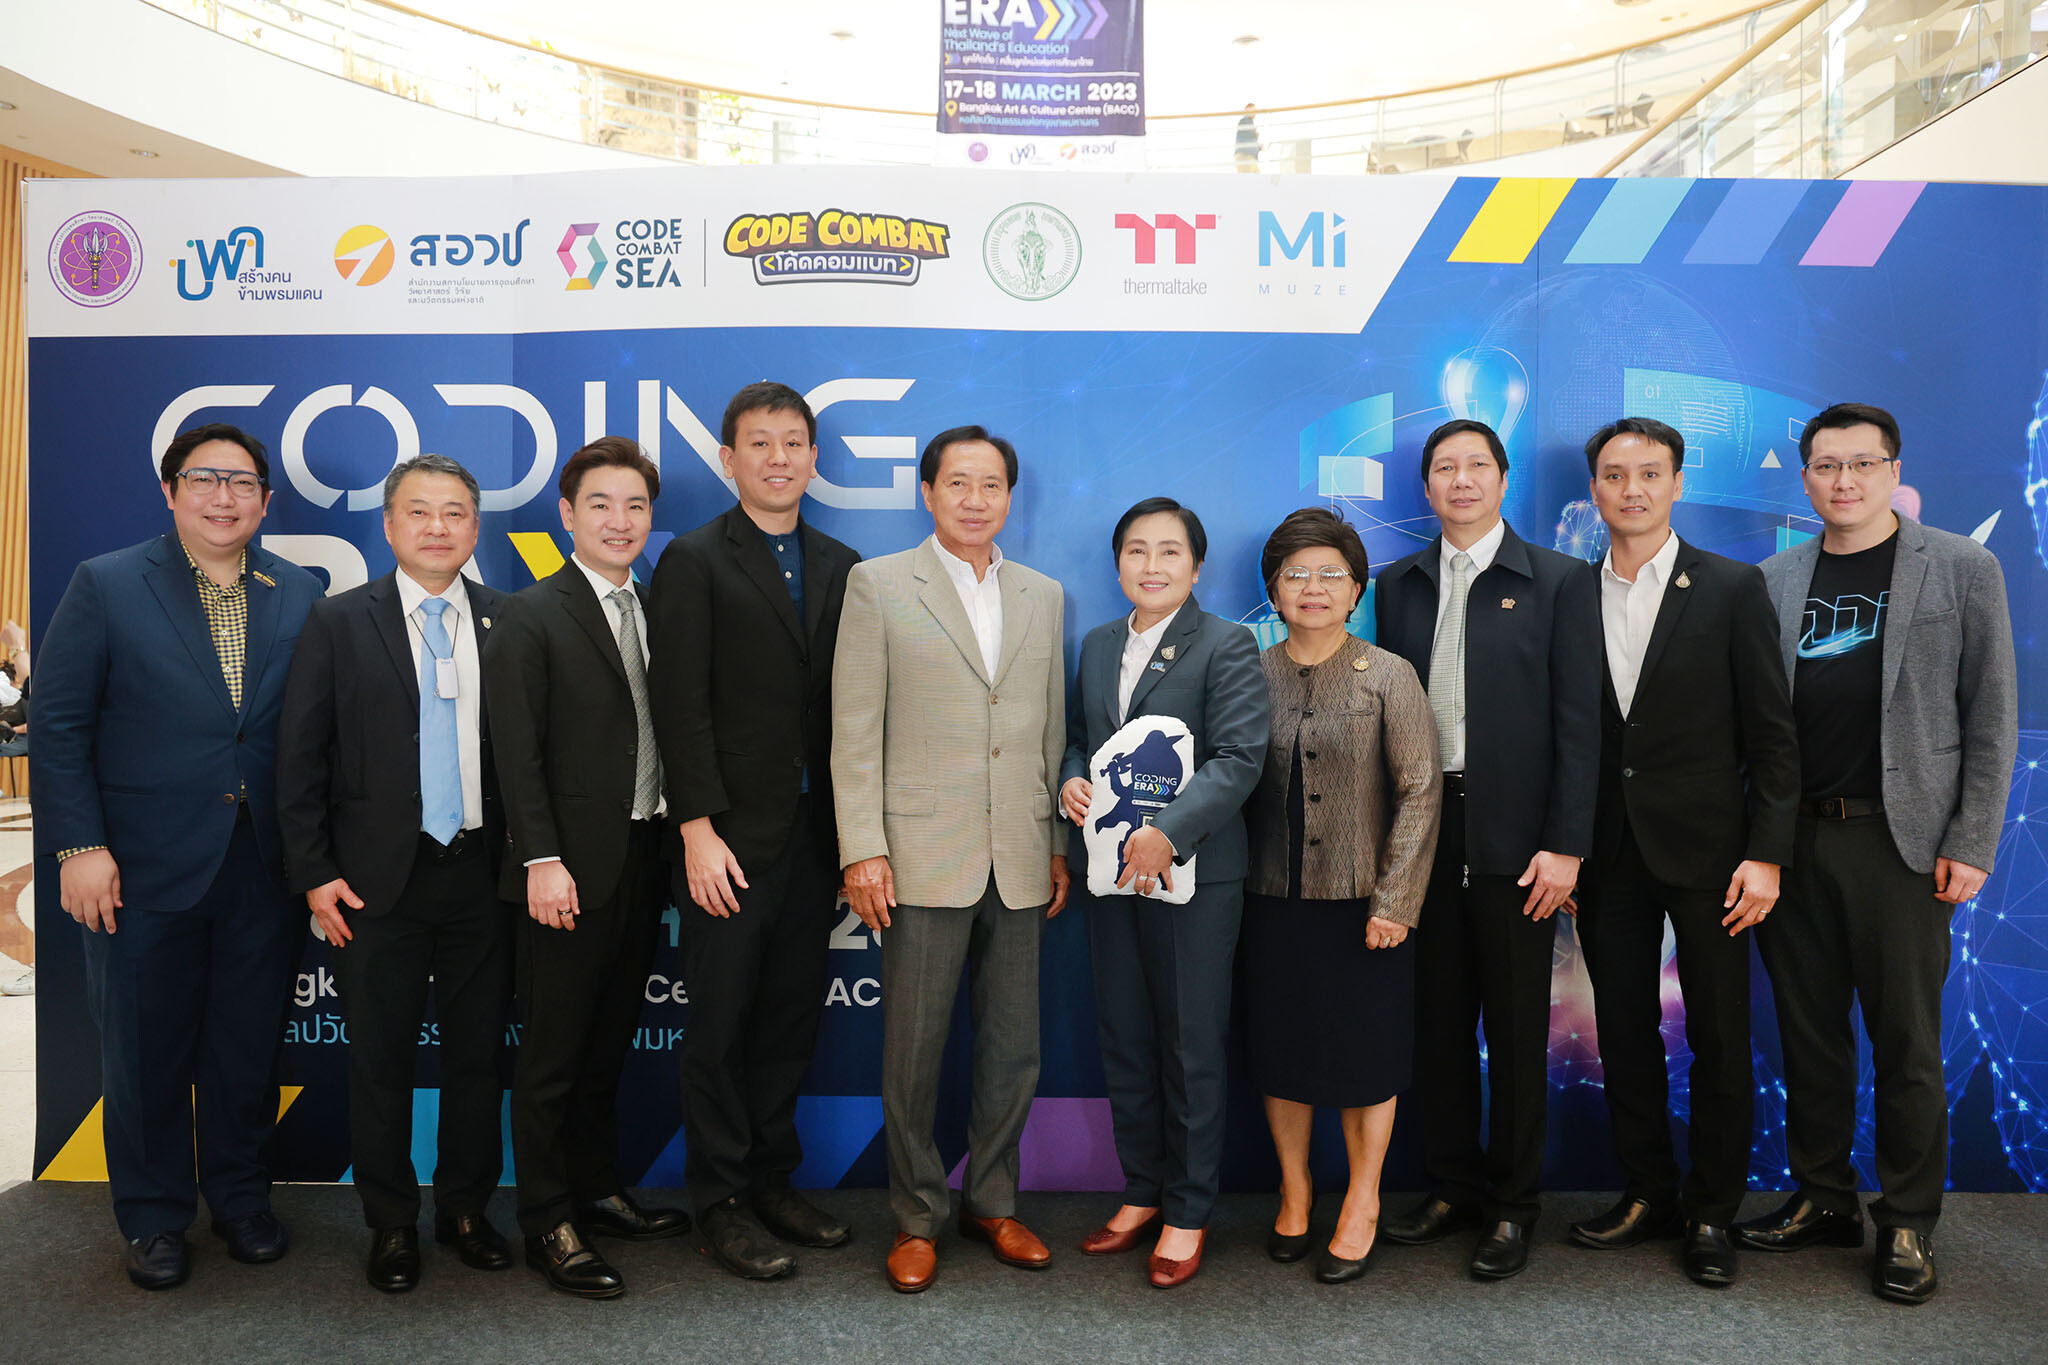 PMU-B joins with CodeCombat (SEA) to organize the "CODING ERA: Next Wave of Thailand's Education"